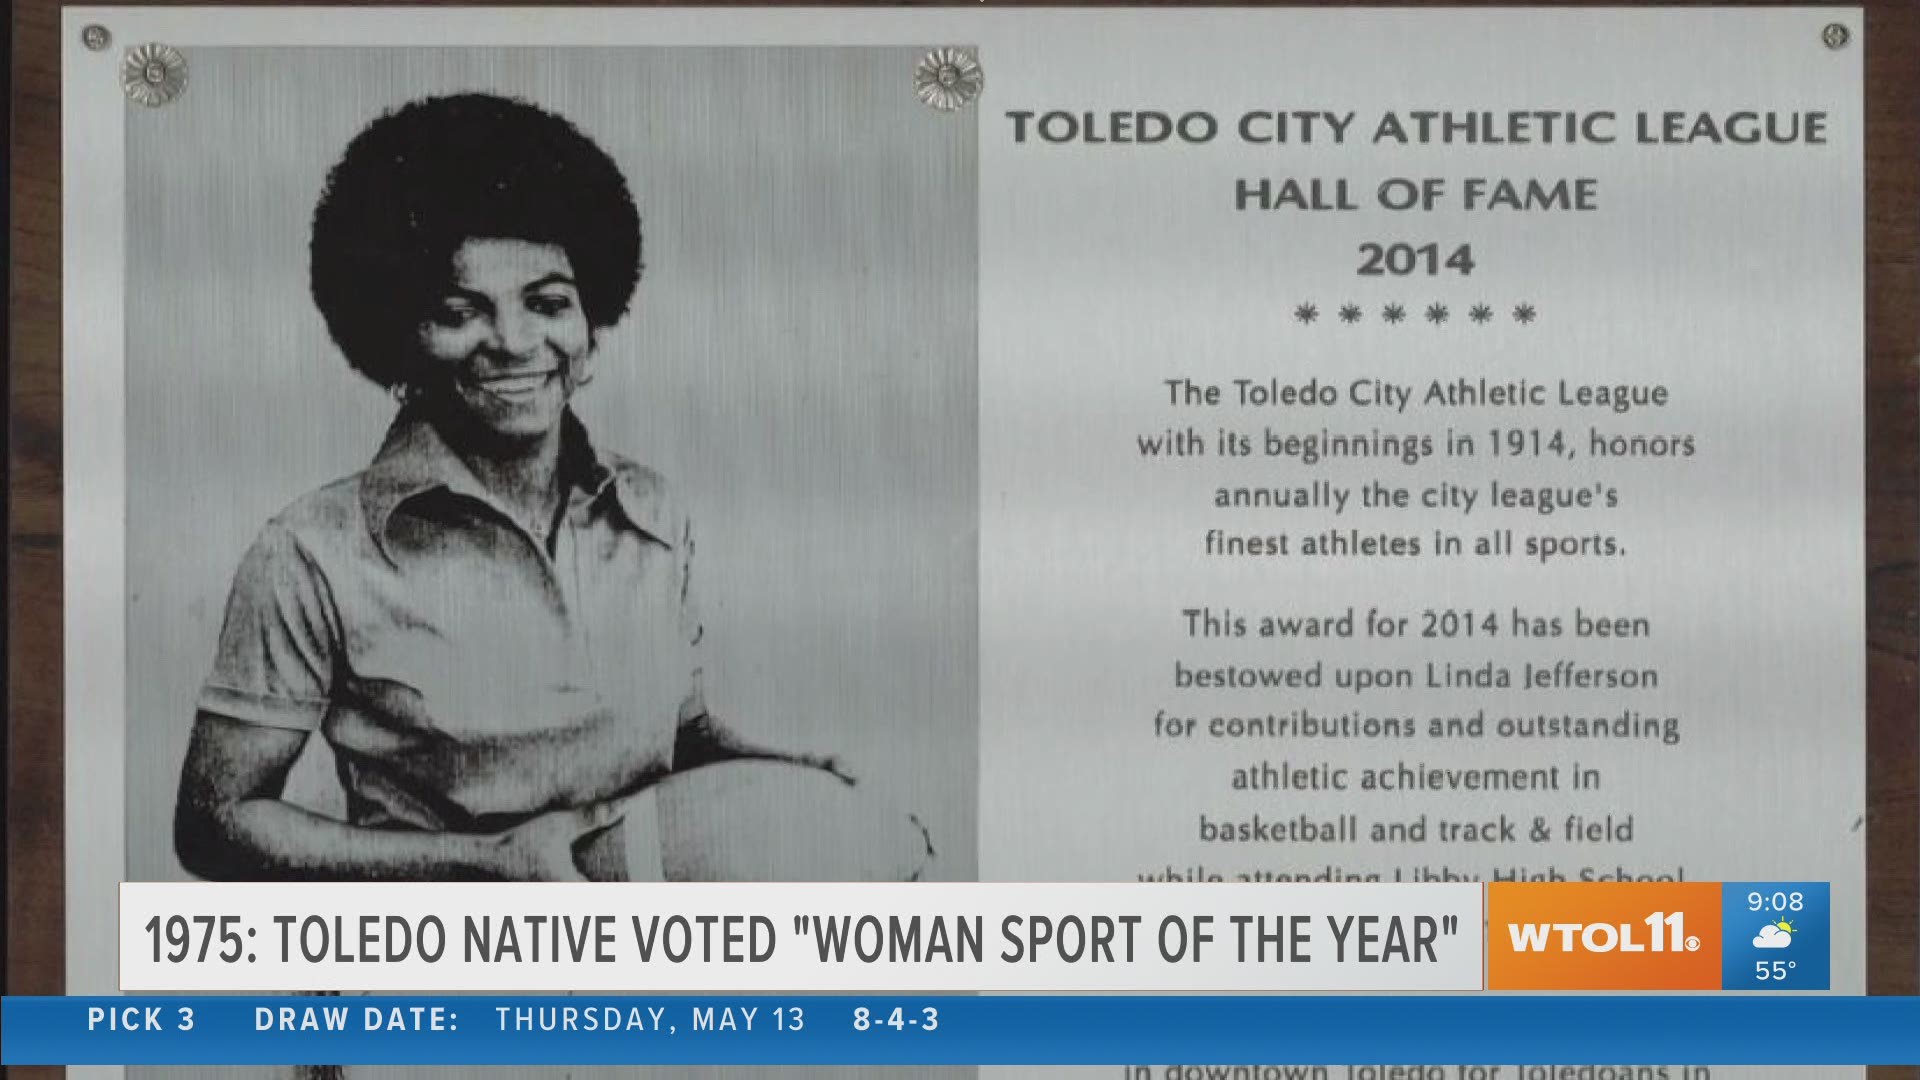 In 1975 Linda Jefferson, Toledo native and star running back for the Toledo Troopers women's football team is voted "Woman Sport of the Year" by Women Sport Magazine